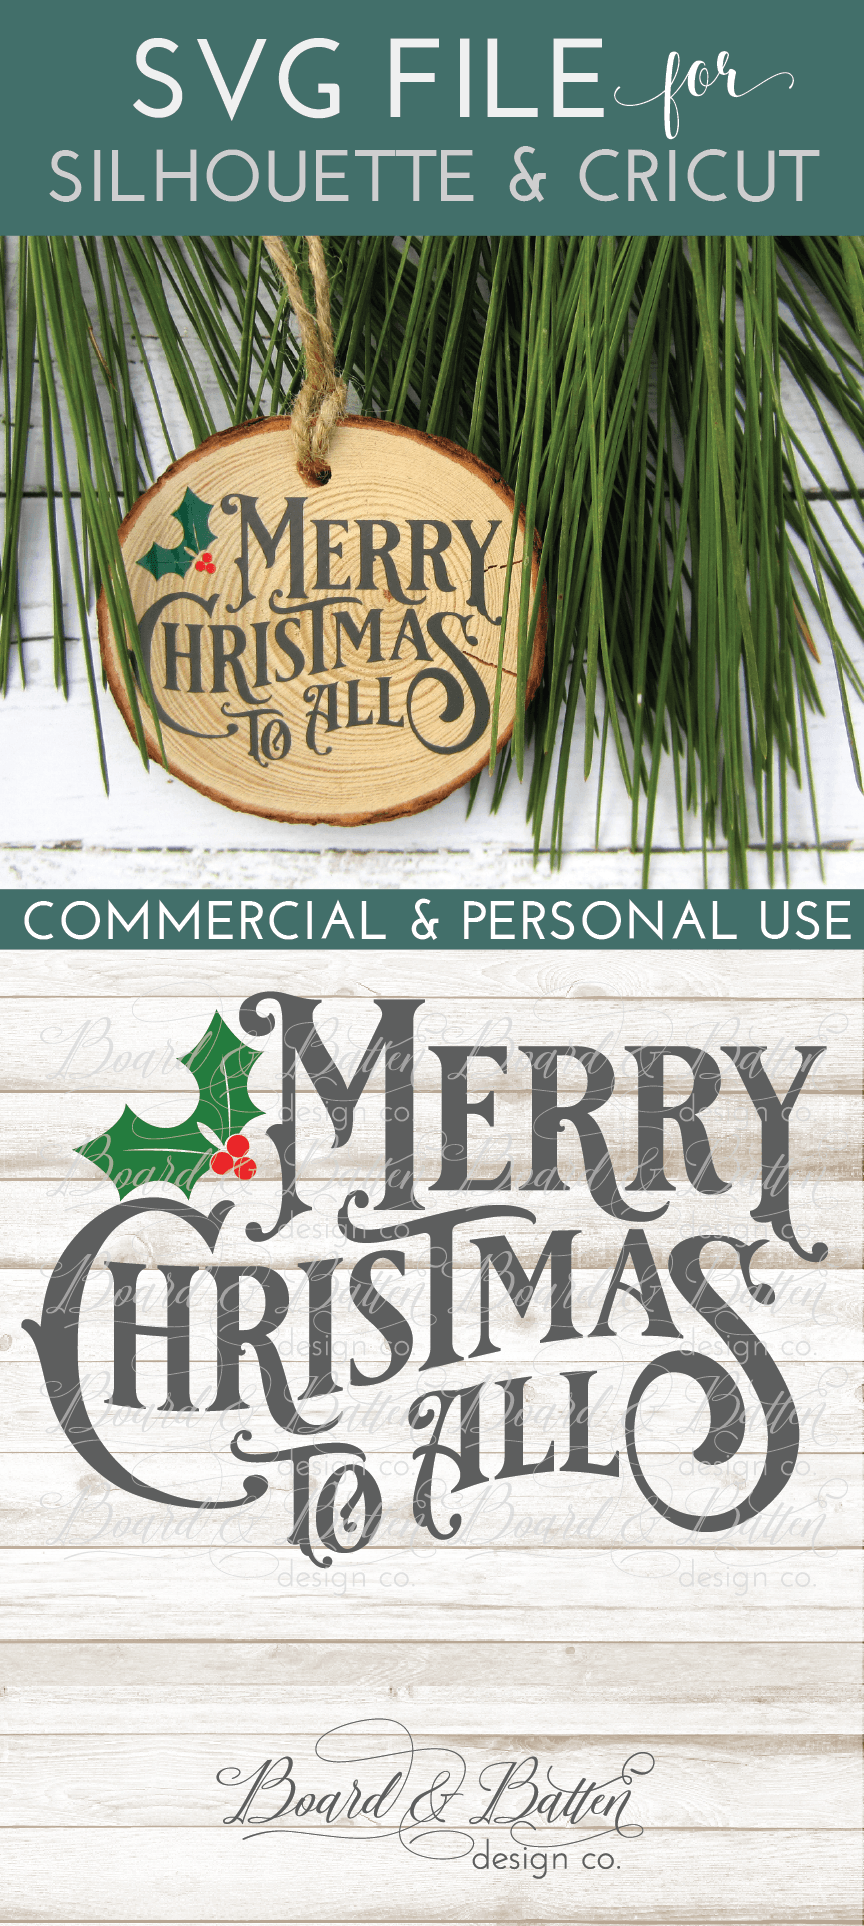 Download Merry Christmas to All Vintage Christmas SVG File - Board ...